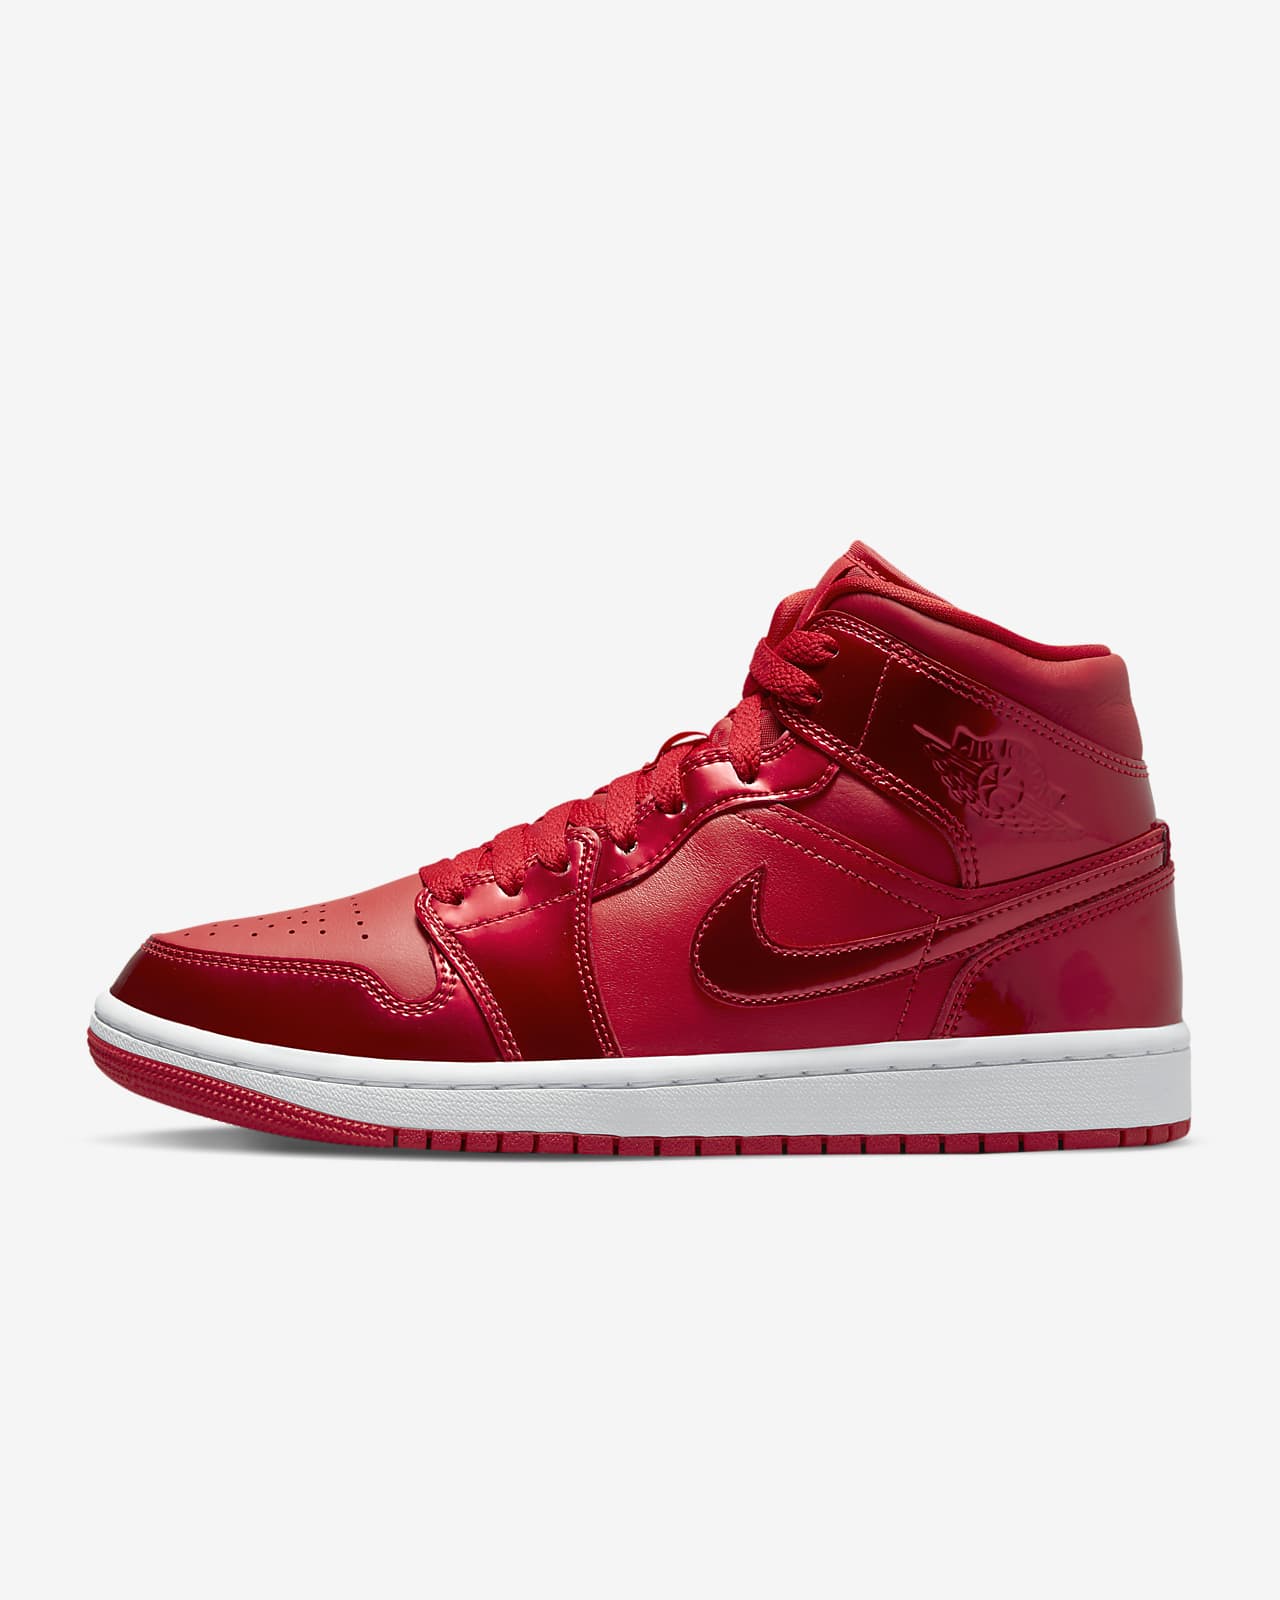 red womens nike shoes